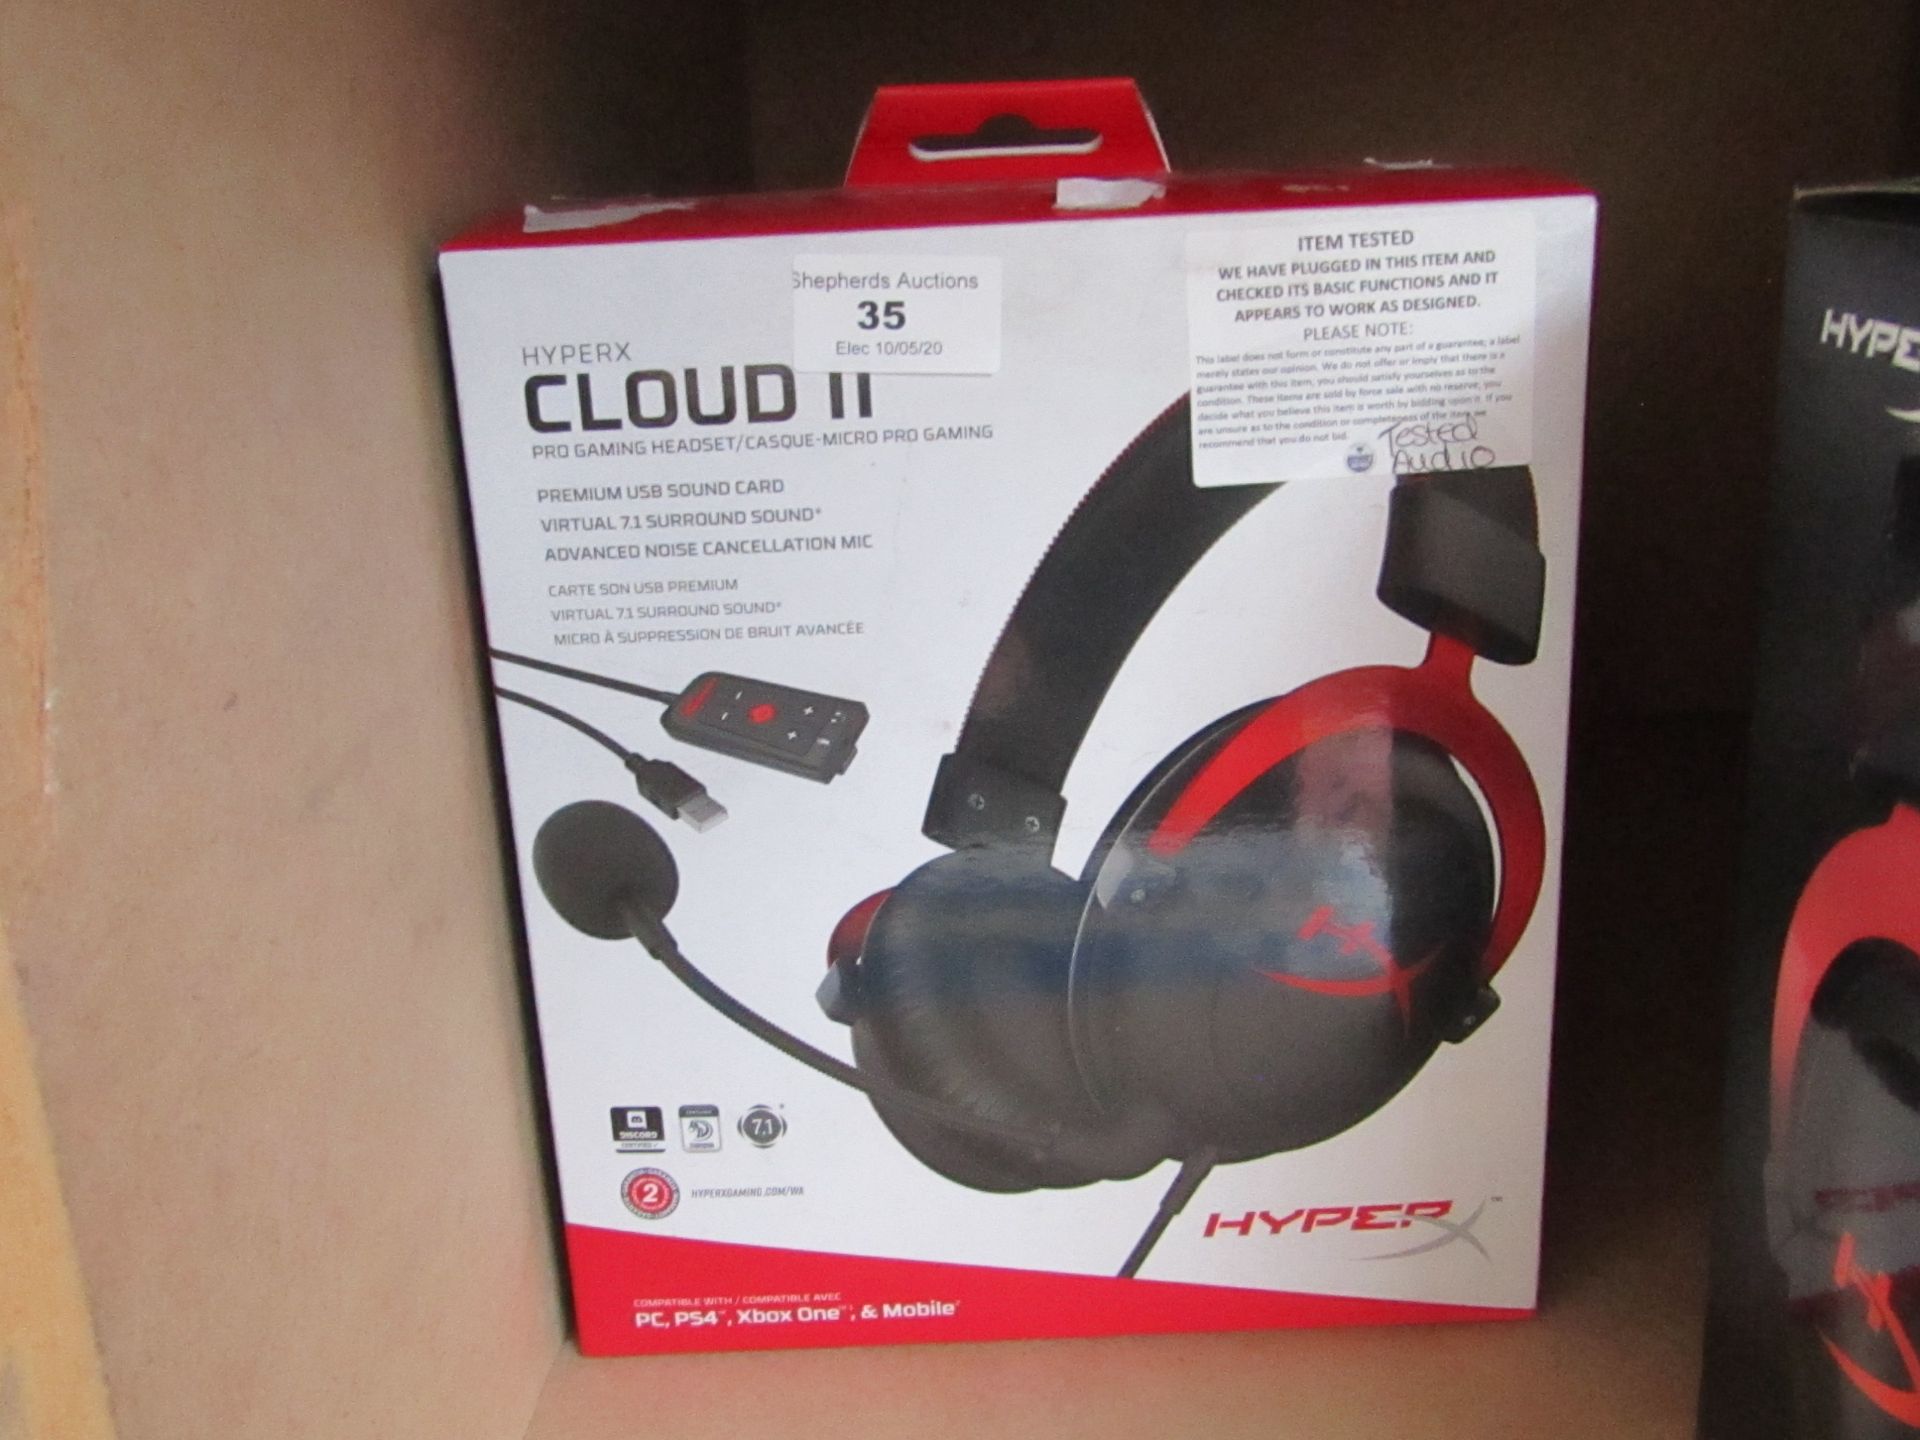 Cloud 2 pro gaming headset, audio tested working, mic untested. Boxed.